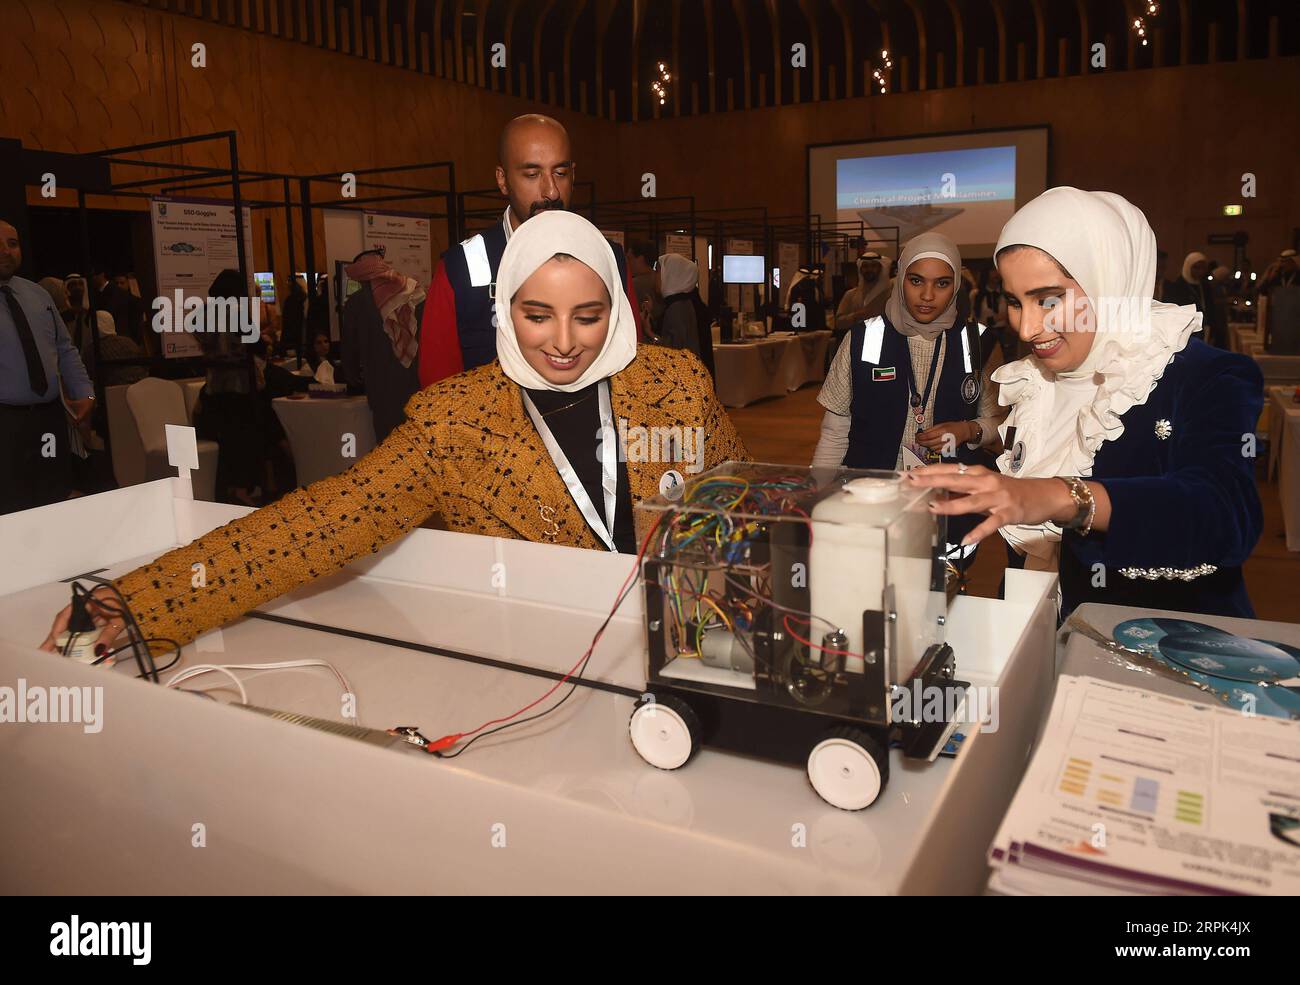 191229 -- KUWAIT CITY, Dec. 29, 2019 Xinhua -- People visit an engineering design exhibition in Kuwait City, Kuwait, Dec. 29, 2019. The exhibition was held here Sunday, which features 107 graduation projects of Kuwaiti students, and aims to encourage students to search for scientific information and to document their achievements. Photo by Asad/Xinhua KUWAIT-KUWAIT CITY-ENGINEERING DESIGN EXHIBITION PUBLICATIONxNOTxINxCHN Stock Photo